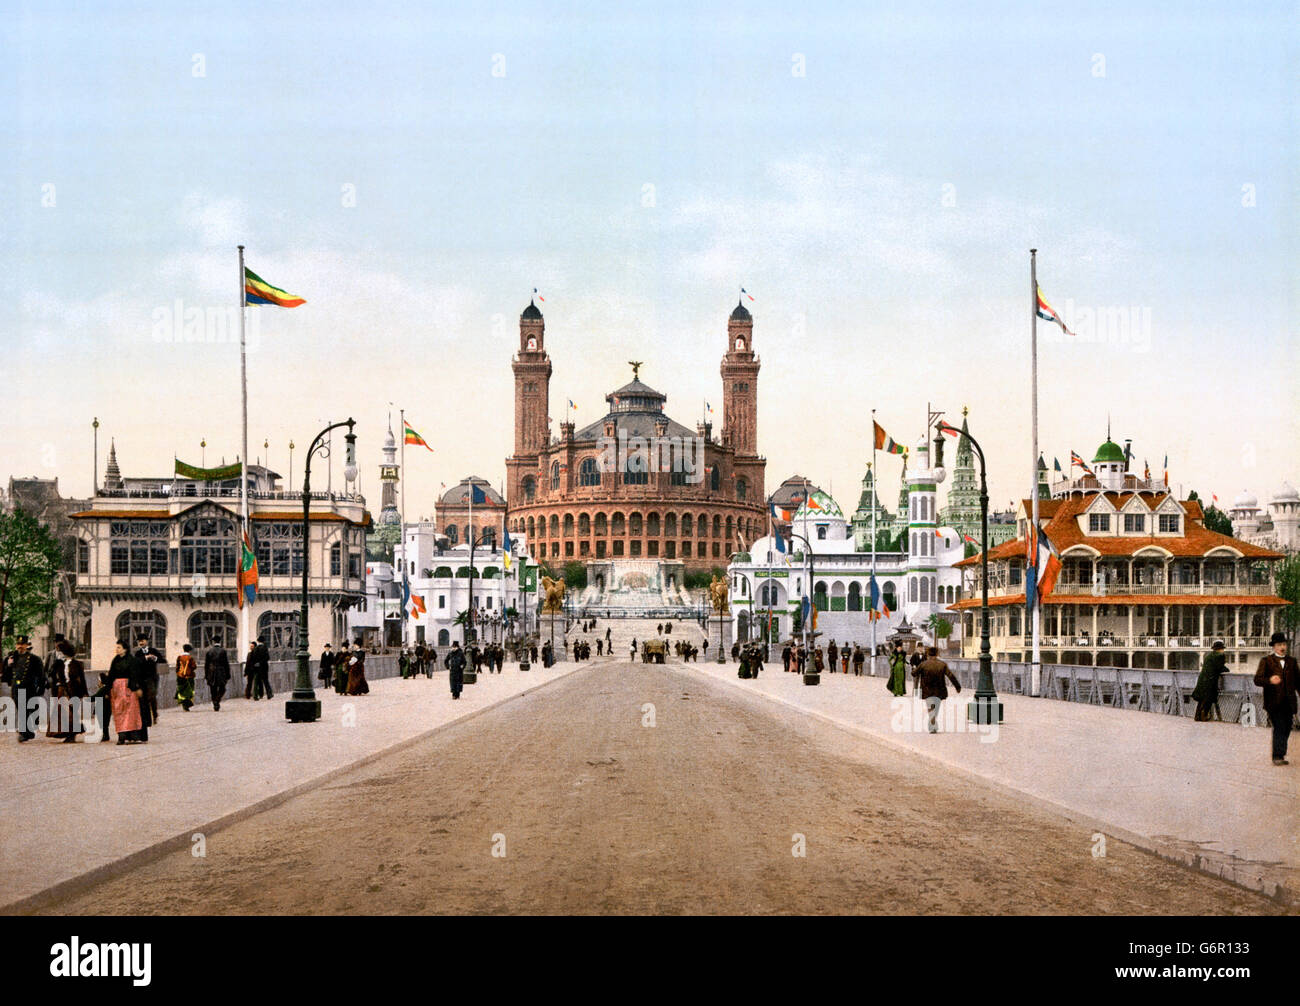 Area around the Trocadero during the Exposition Universelle 1900, Paris, France. Detroit Publishing, 1900 Stock Photo